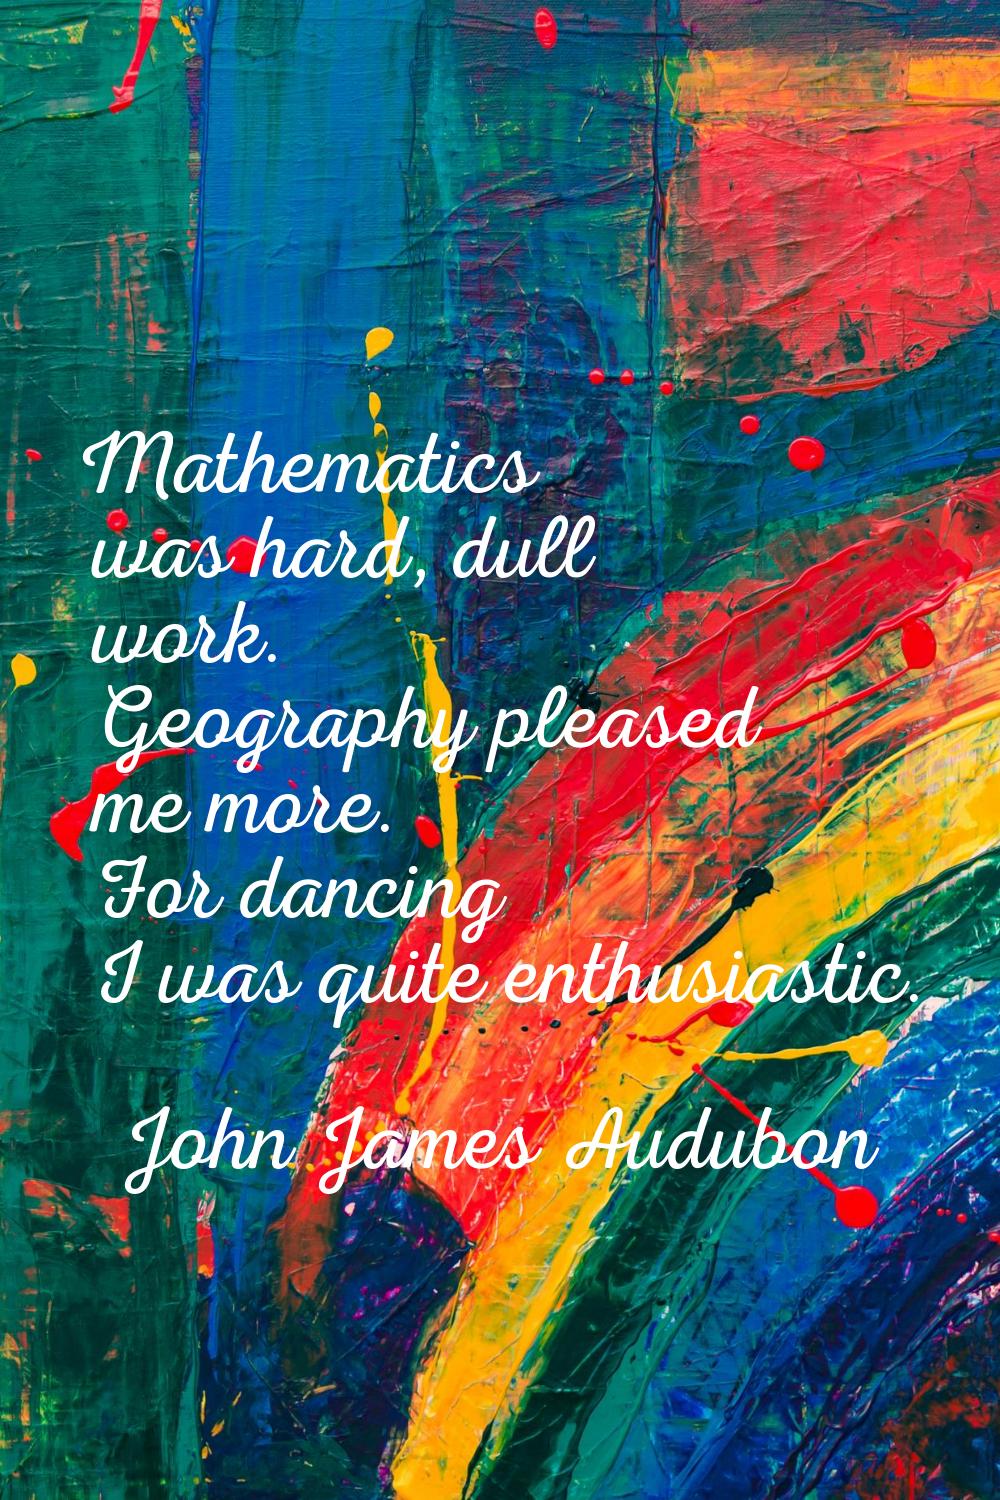 Mathematics was hard, dull work. Geography pleased me more. For dancing I was quite enthusiastic.